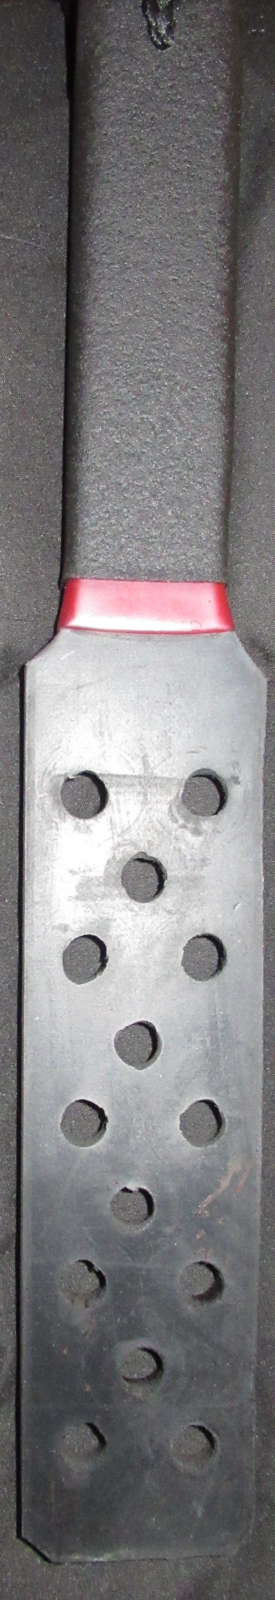 rubber sp;anking paddle with holes